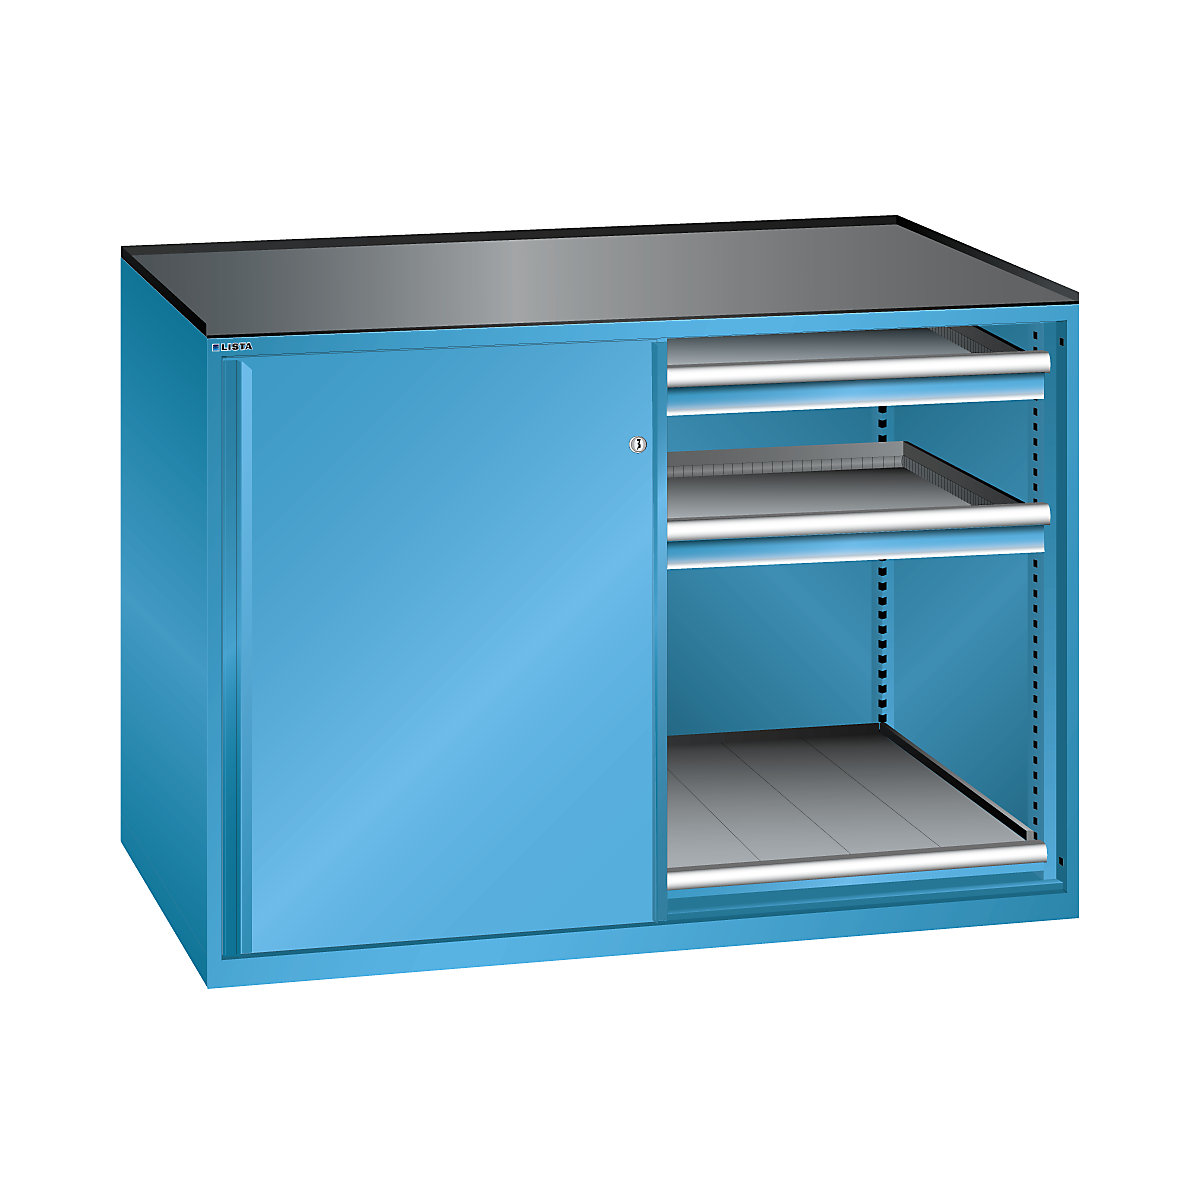 Sliding door cupboard, max. load of pull-out shelf 75 kg - LISTA